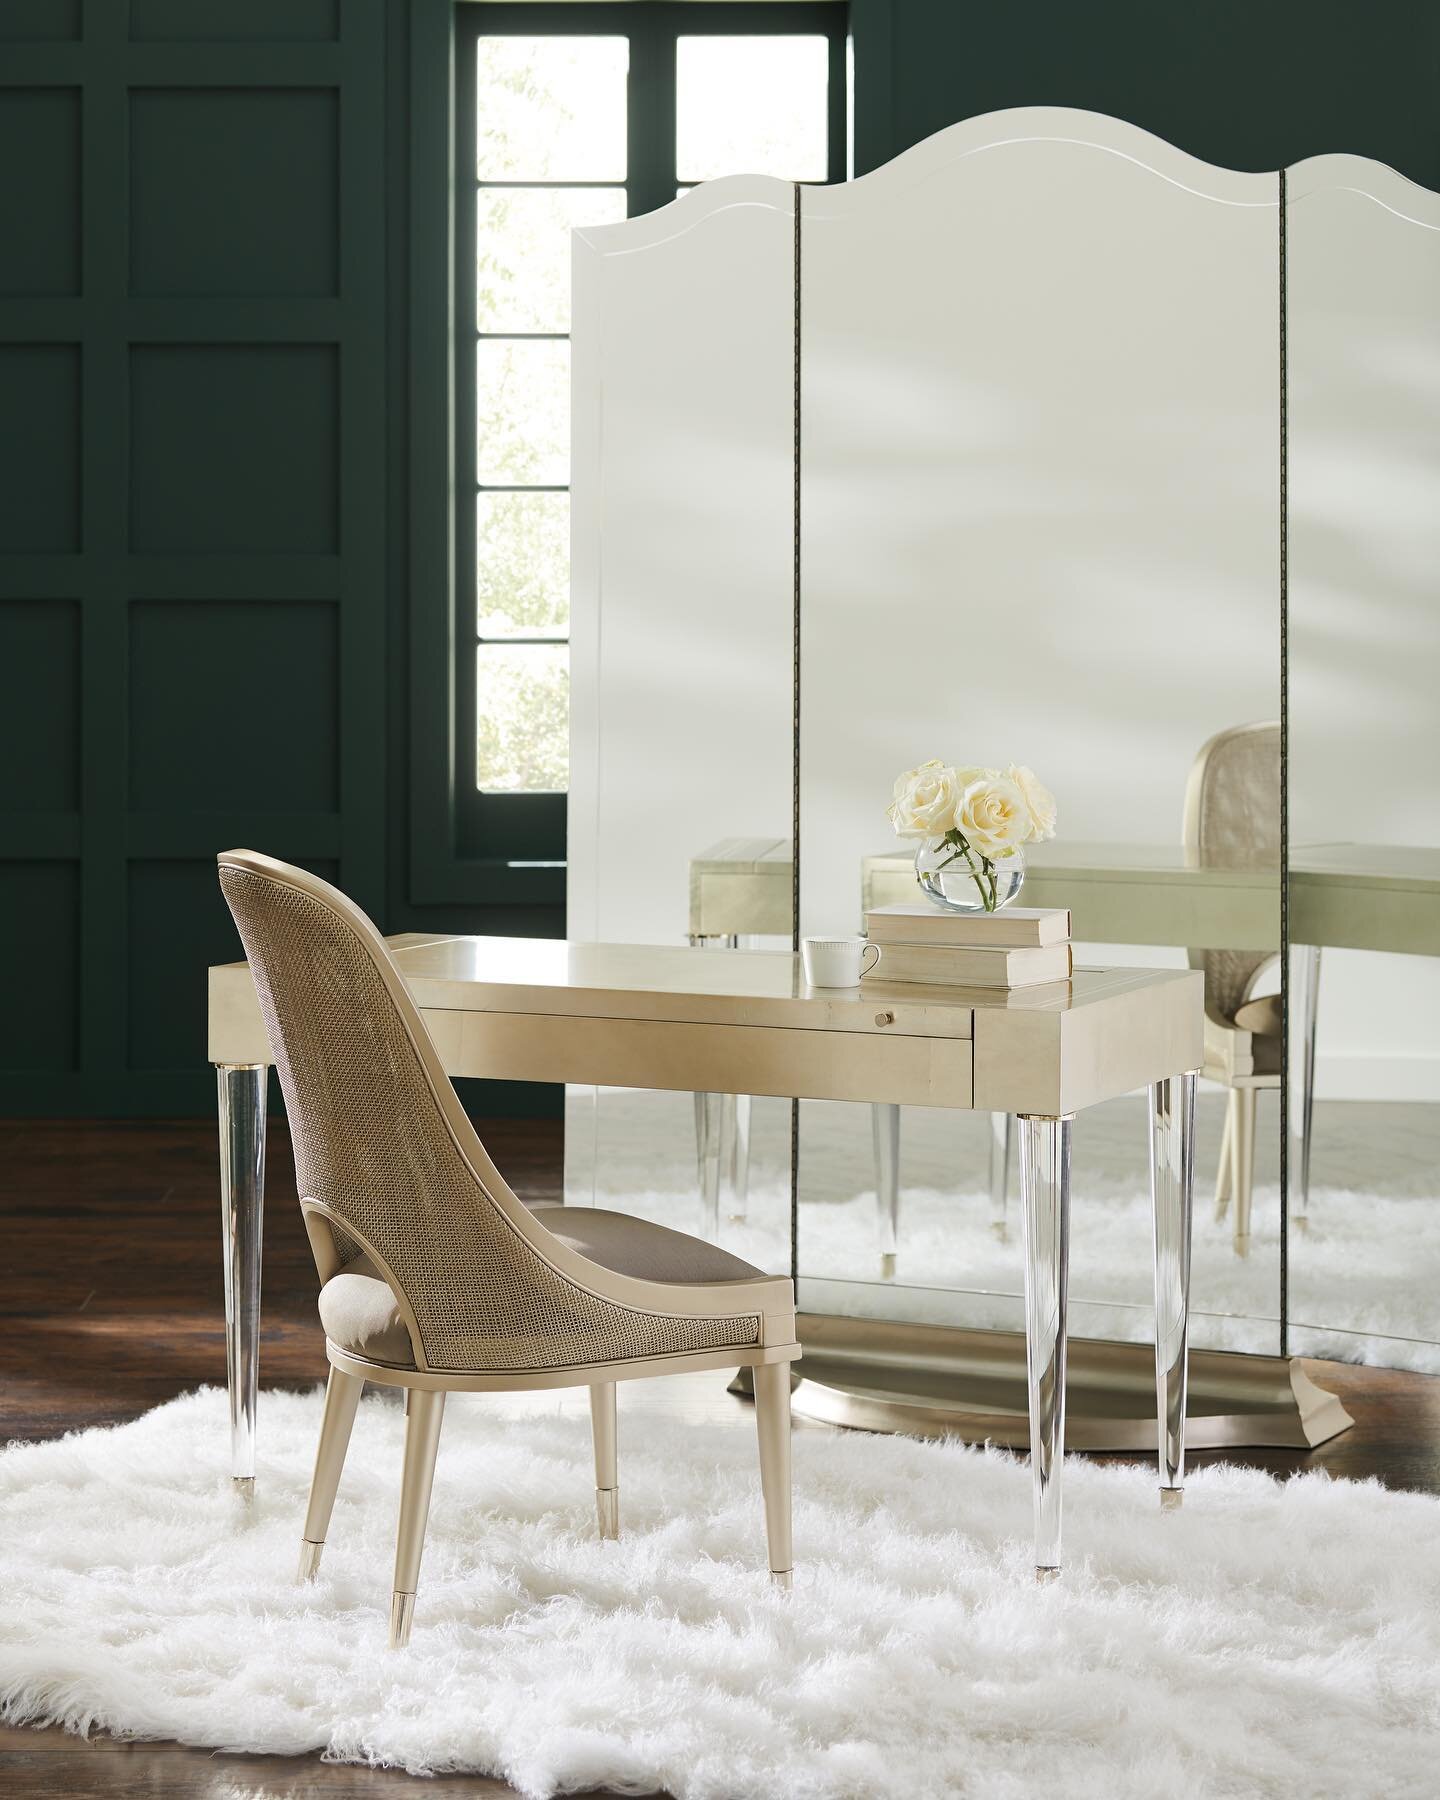 The perfect mirror for the perfect vanity. Ask us about our vanity options ready to order! 
-
Pictured above is @caracolehome &quot;Beauty Queen&quot; mirror with &quot;Moment of Clarity&quot; vanity.